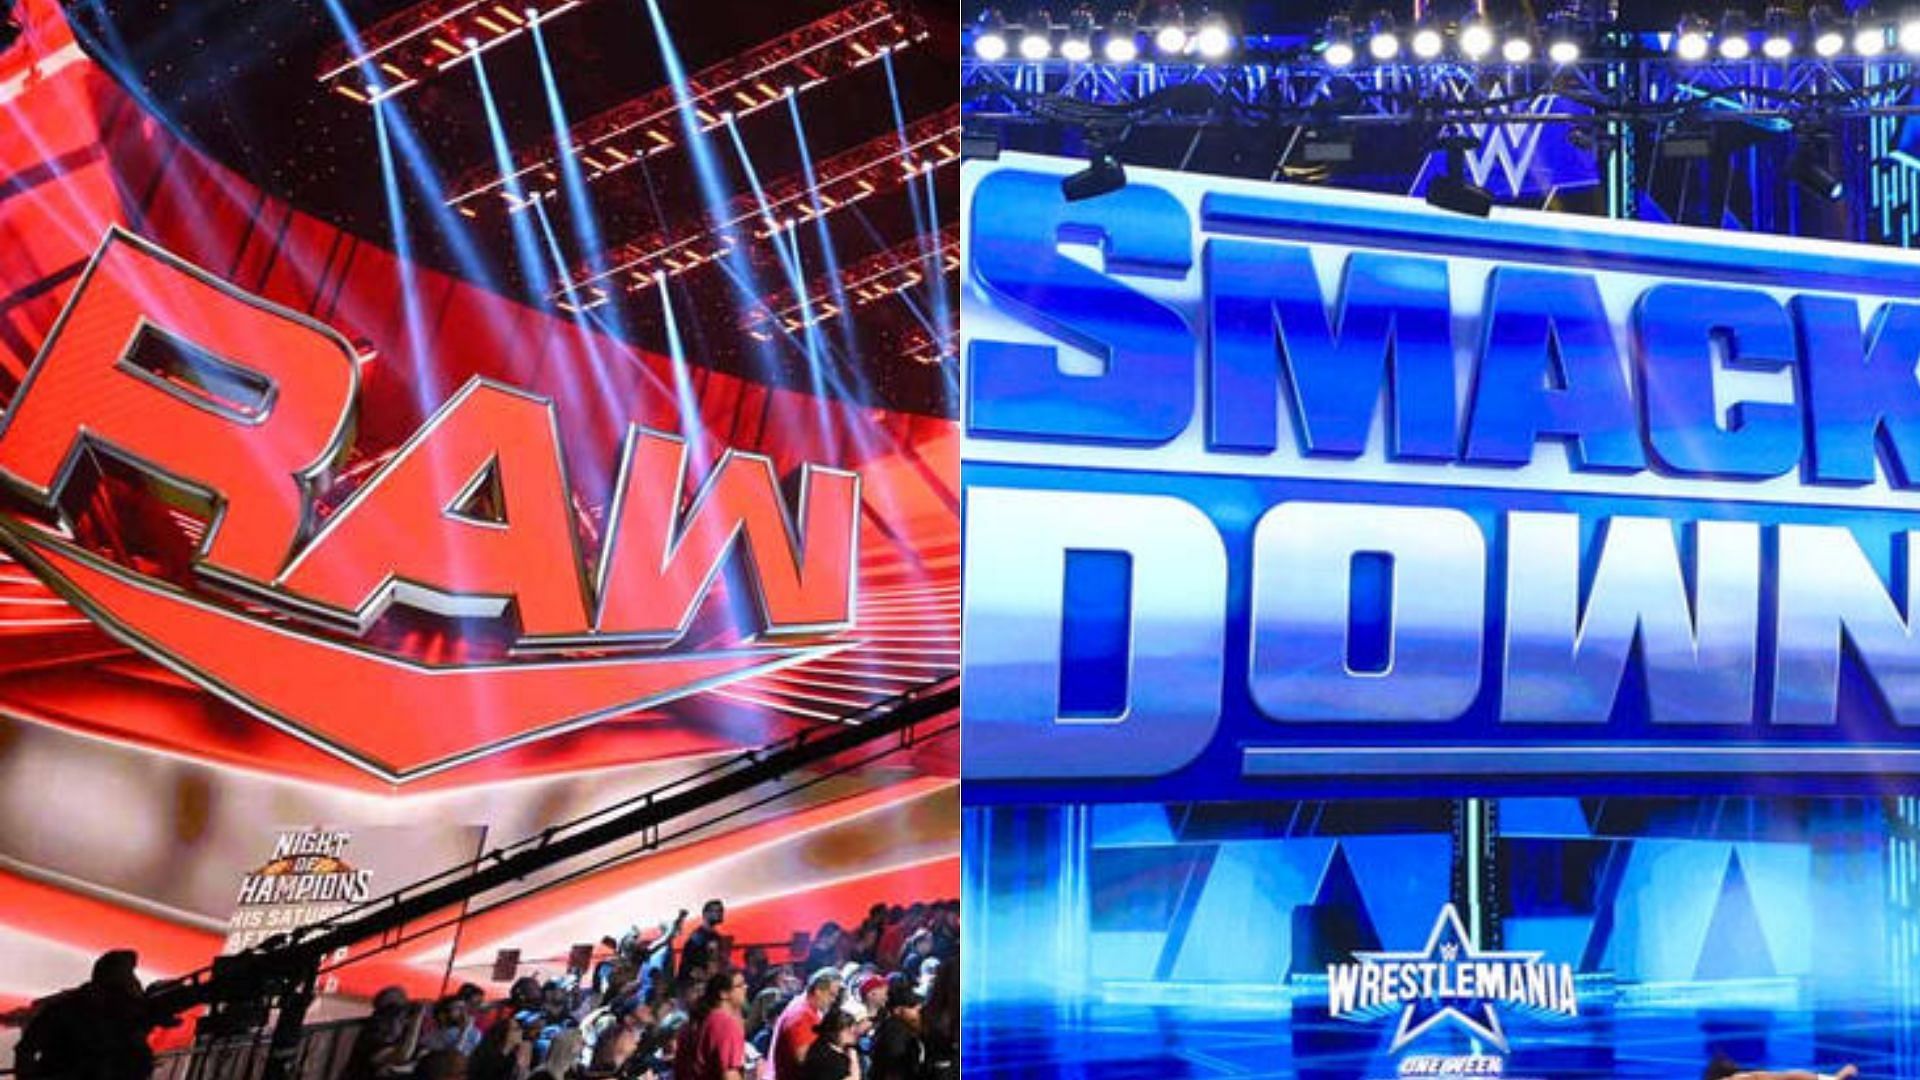 RAW and SmackDown are WWE